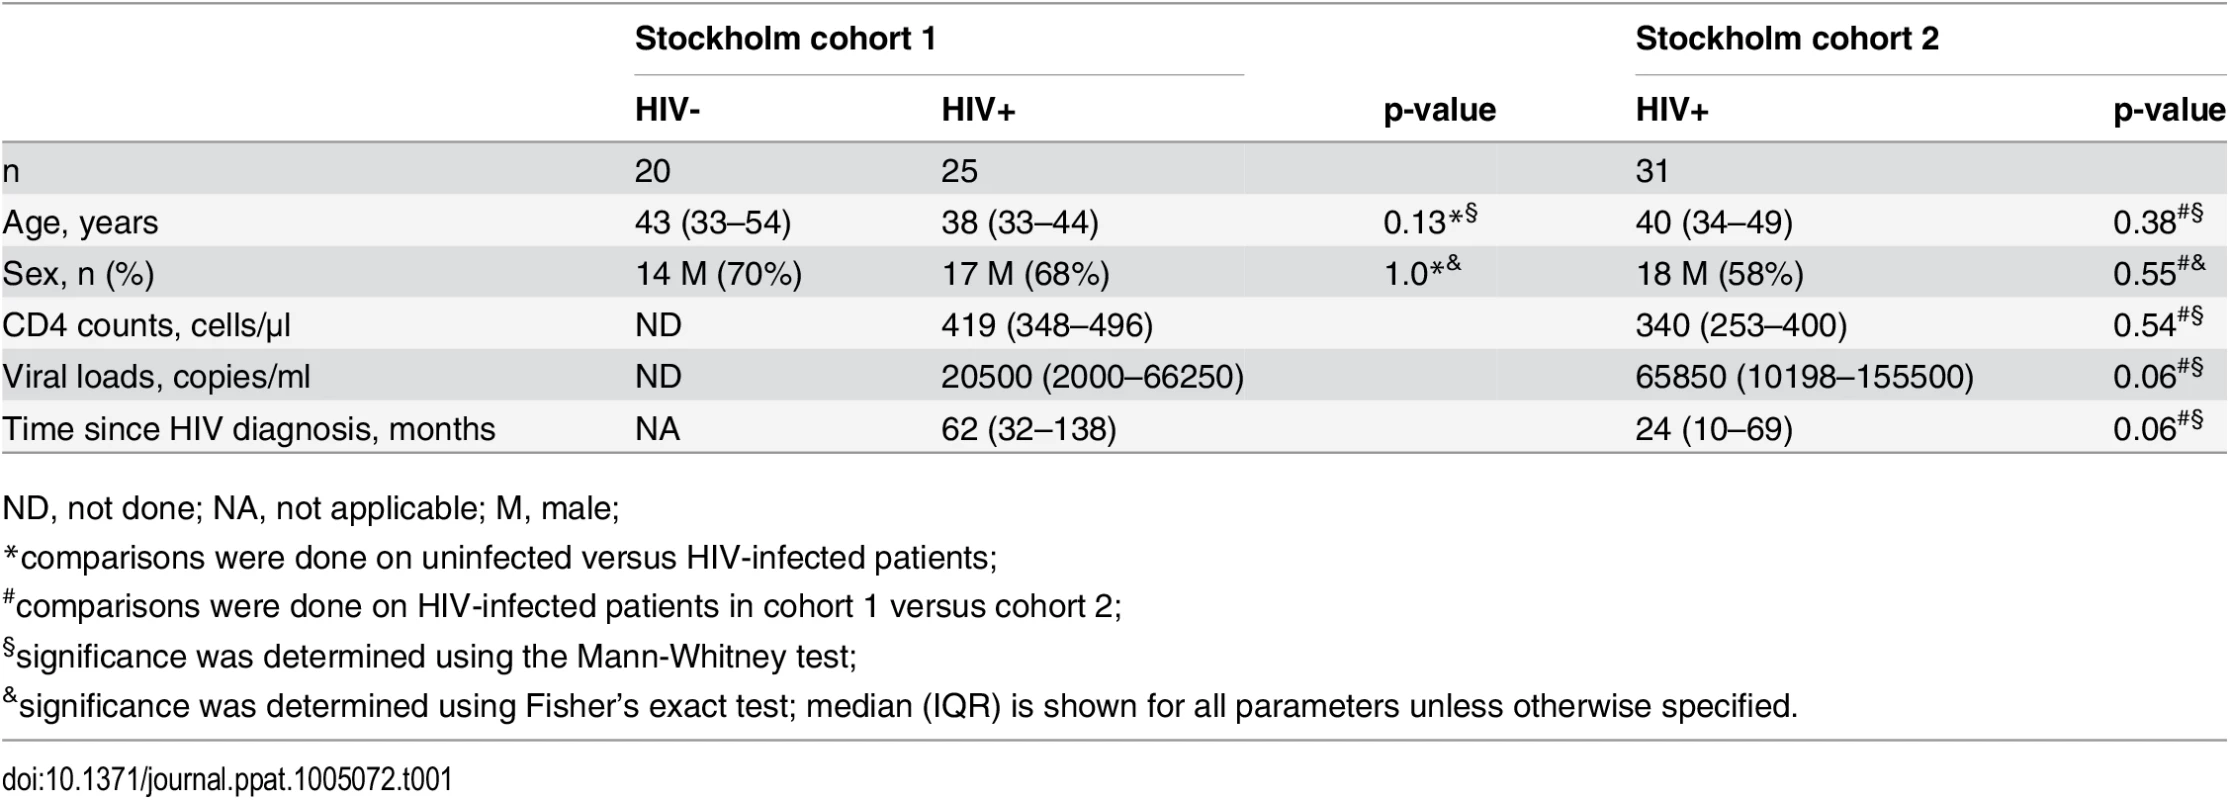 Characteristics of HIV-1 infected patients and healthy controls.